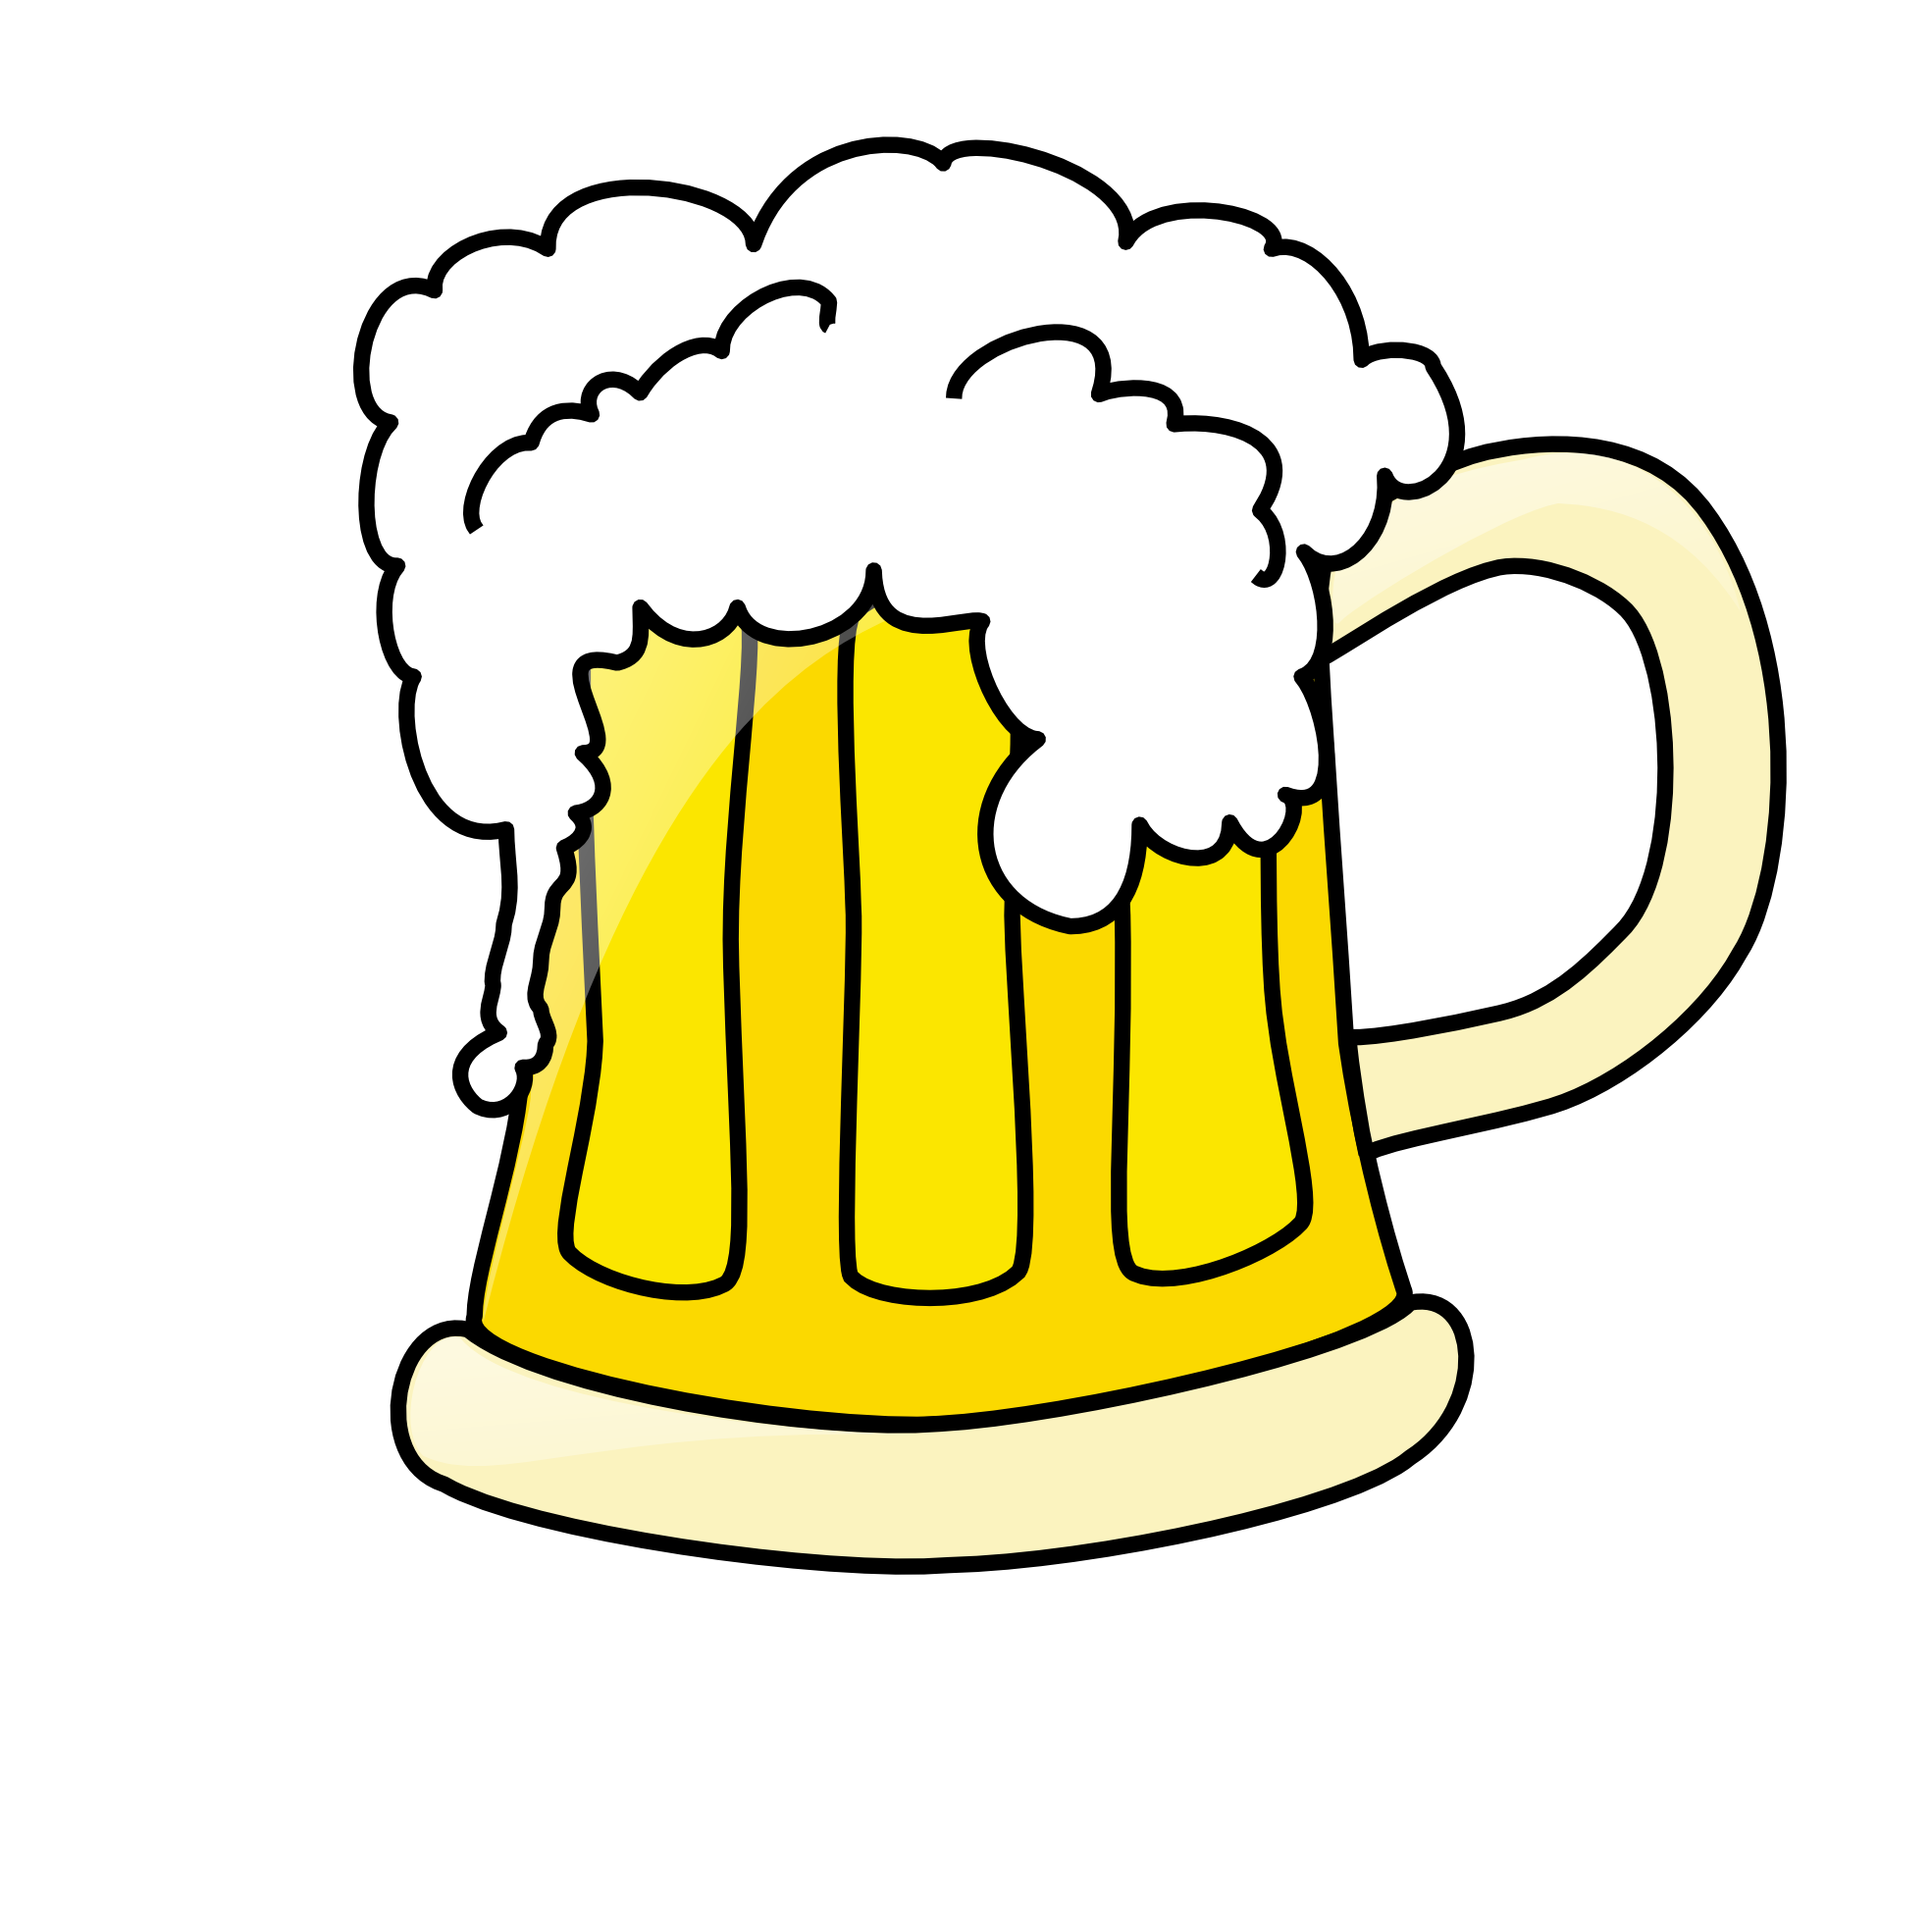 beer can clipart free - photo #21